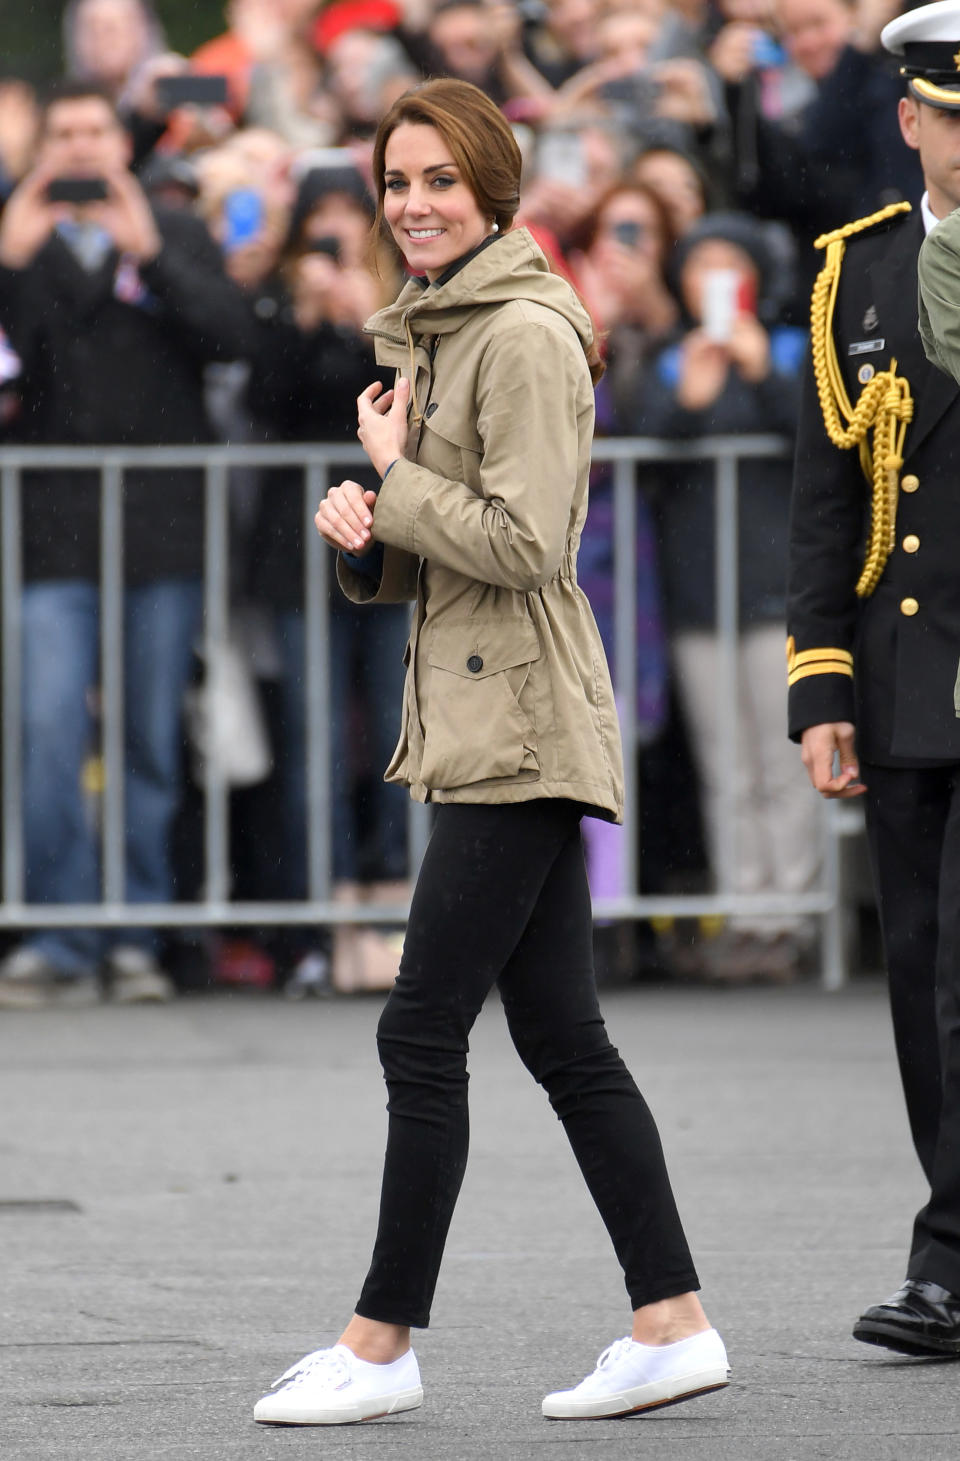 The Duchess of Cambridge has been wearing these shoes for years.